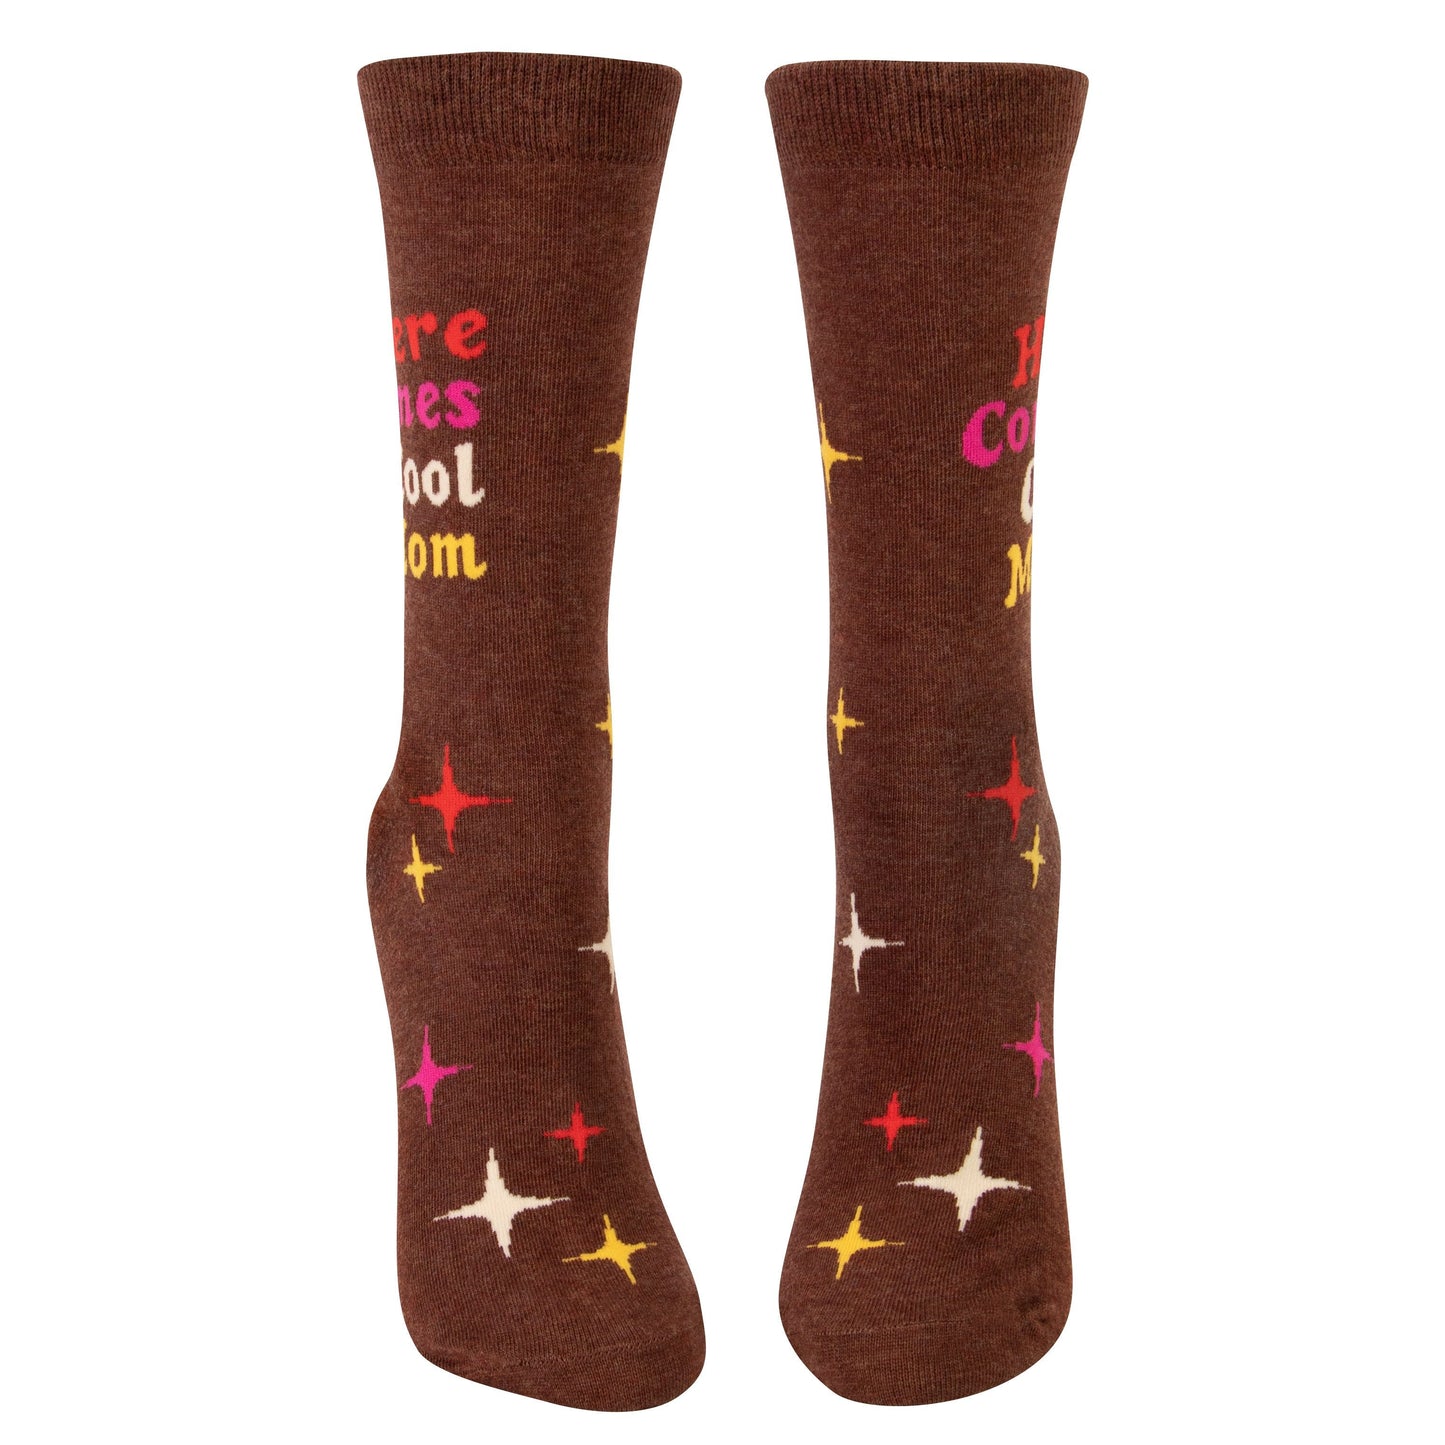 Here Comes Cool Mom Women's Crew Novelty Socks in Groovy '70s Brown